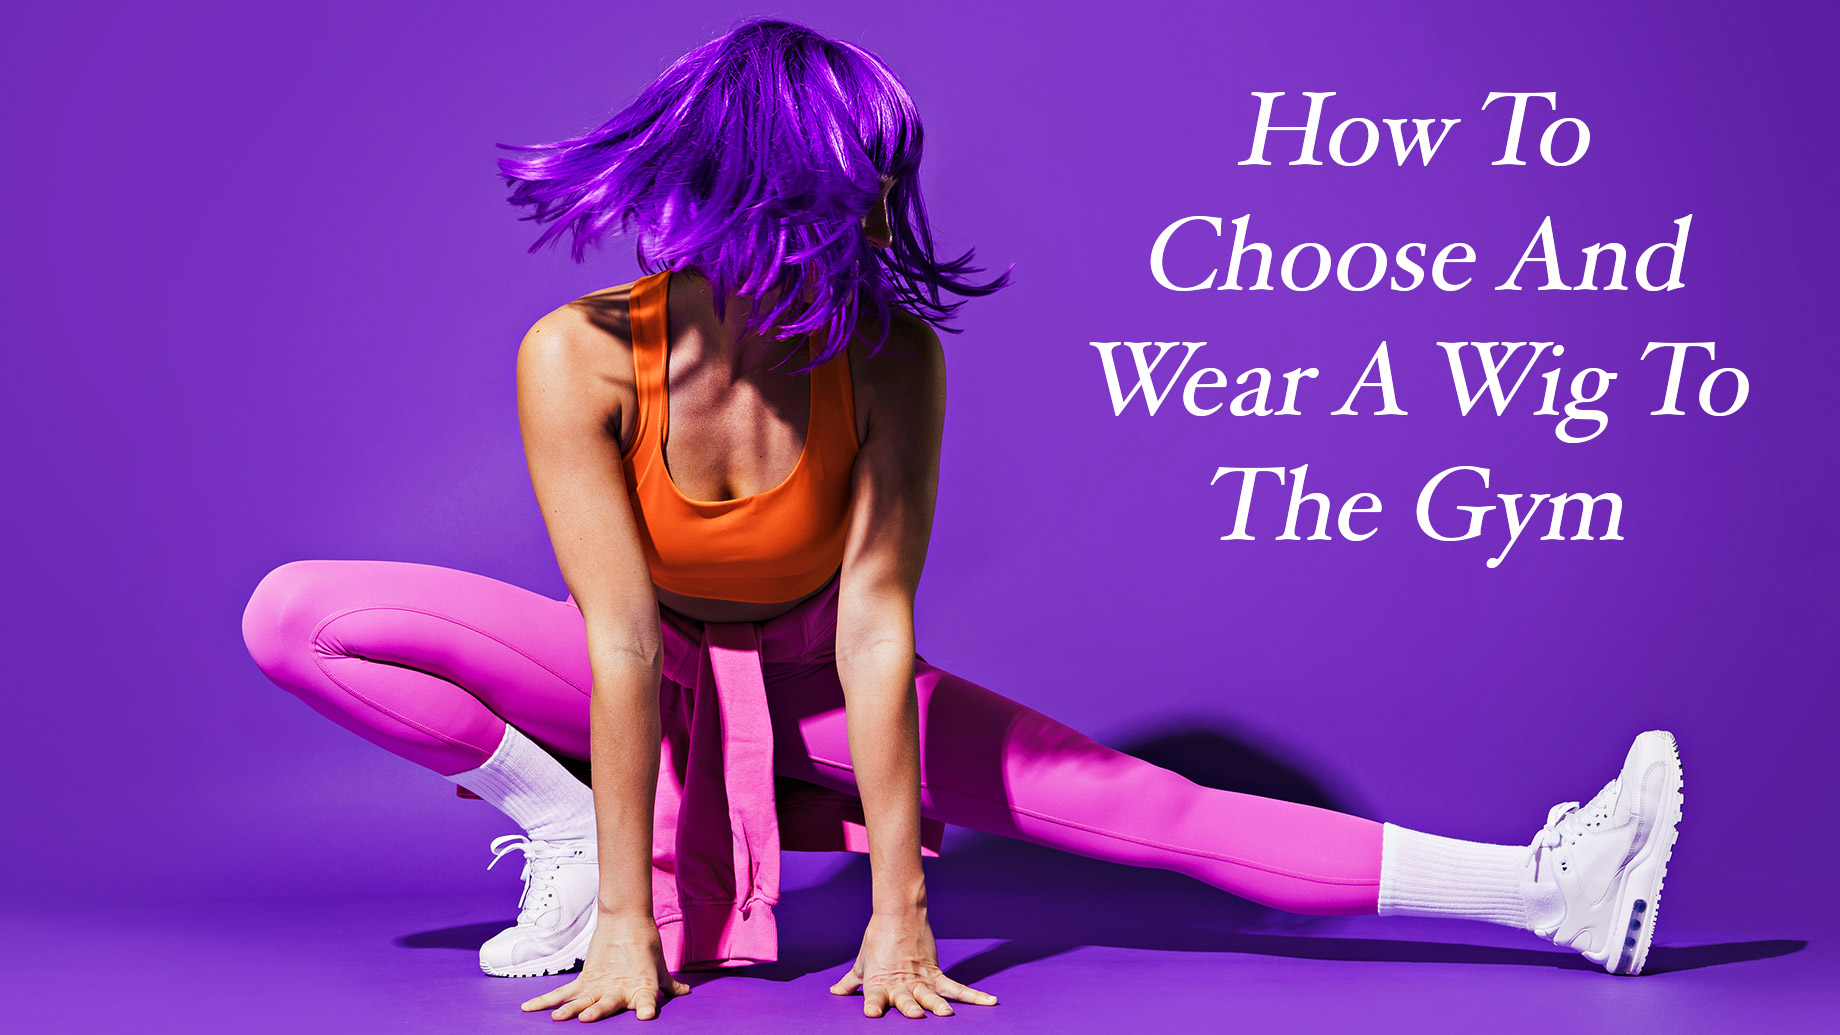 How To Choose And Wear A Wig To The Gym